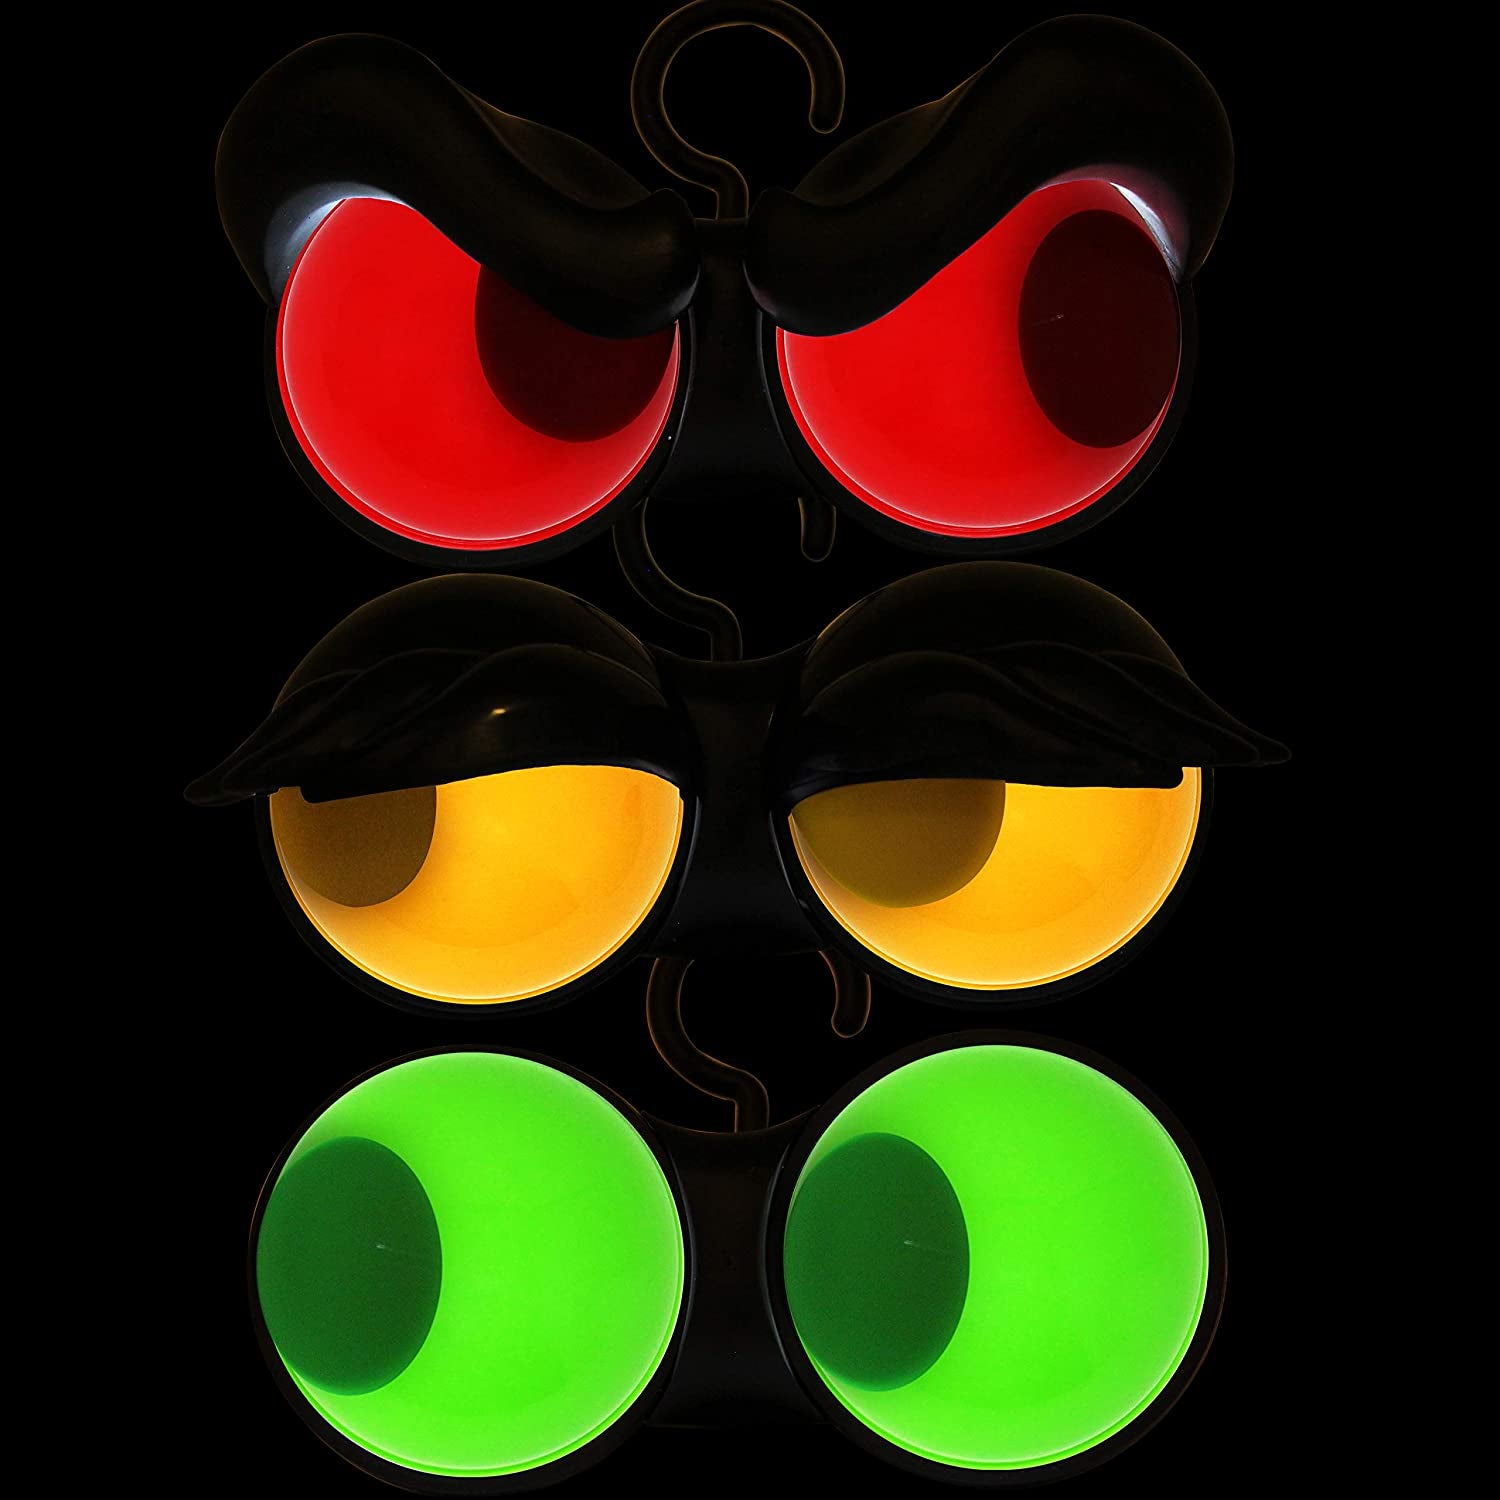 3 Pack Halloween Flashing Peeping Eyes Lights with Timer Function, Light up Battery Operated Halloween Light Decorations, for Indoor Outdoor Room Yard Garden Party Carnival Supplies